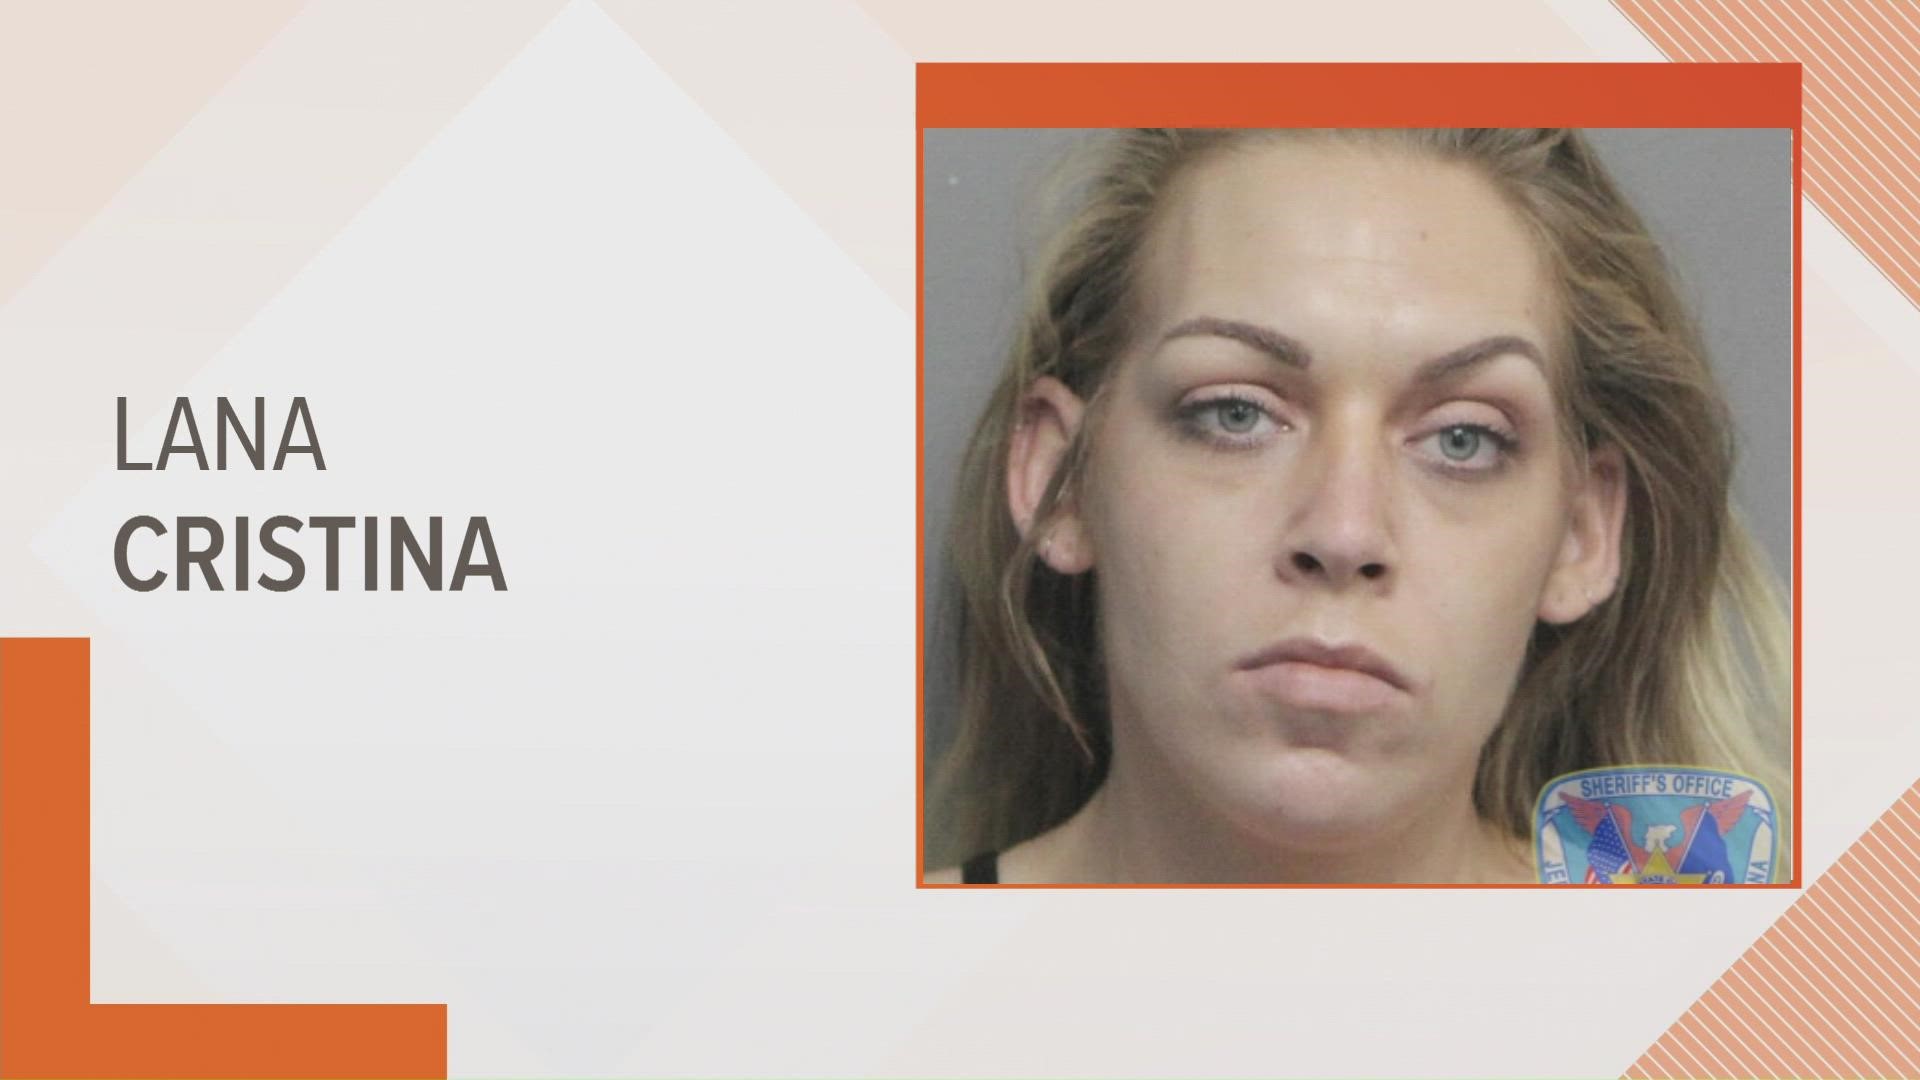 The Jefferson Parish Sheriff’s Office says 28-year-old Lana Cristina was booked on charges of second-degree murder on Wednesday.